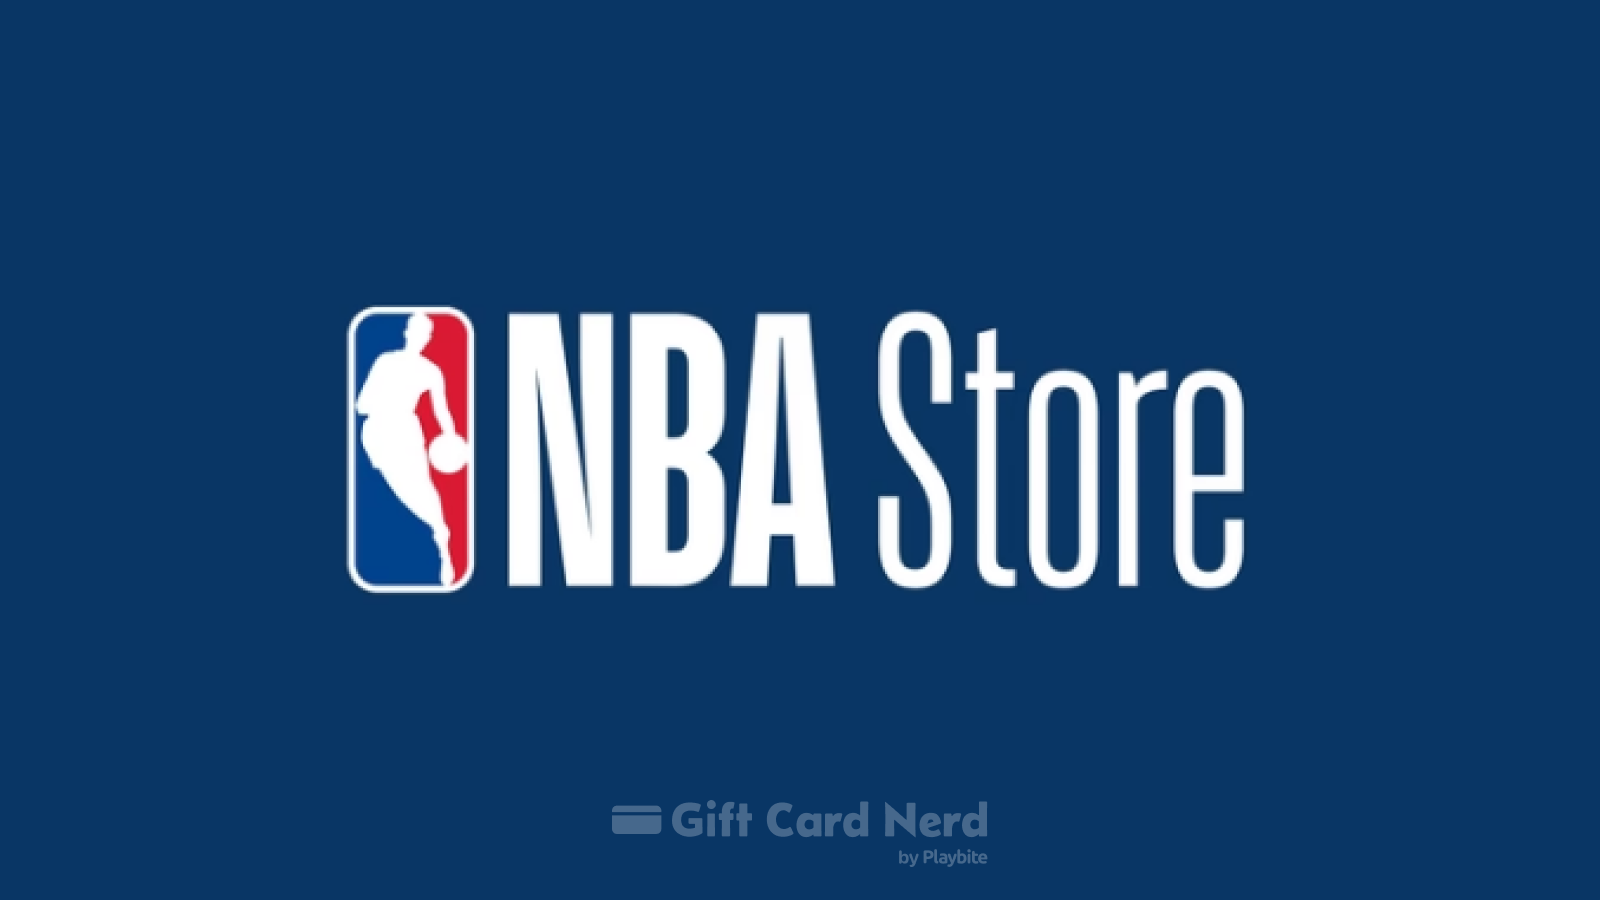 Can I Use an NBA Store Gift Card on Venmo?